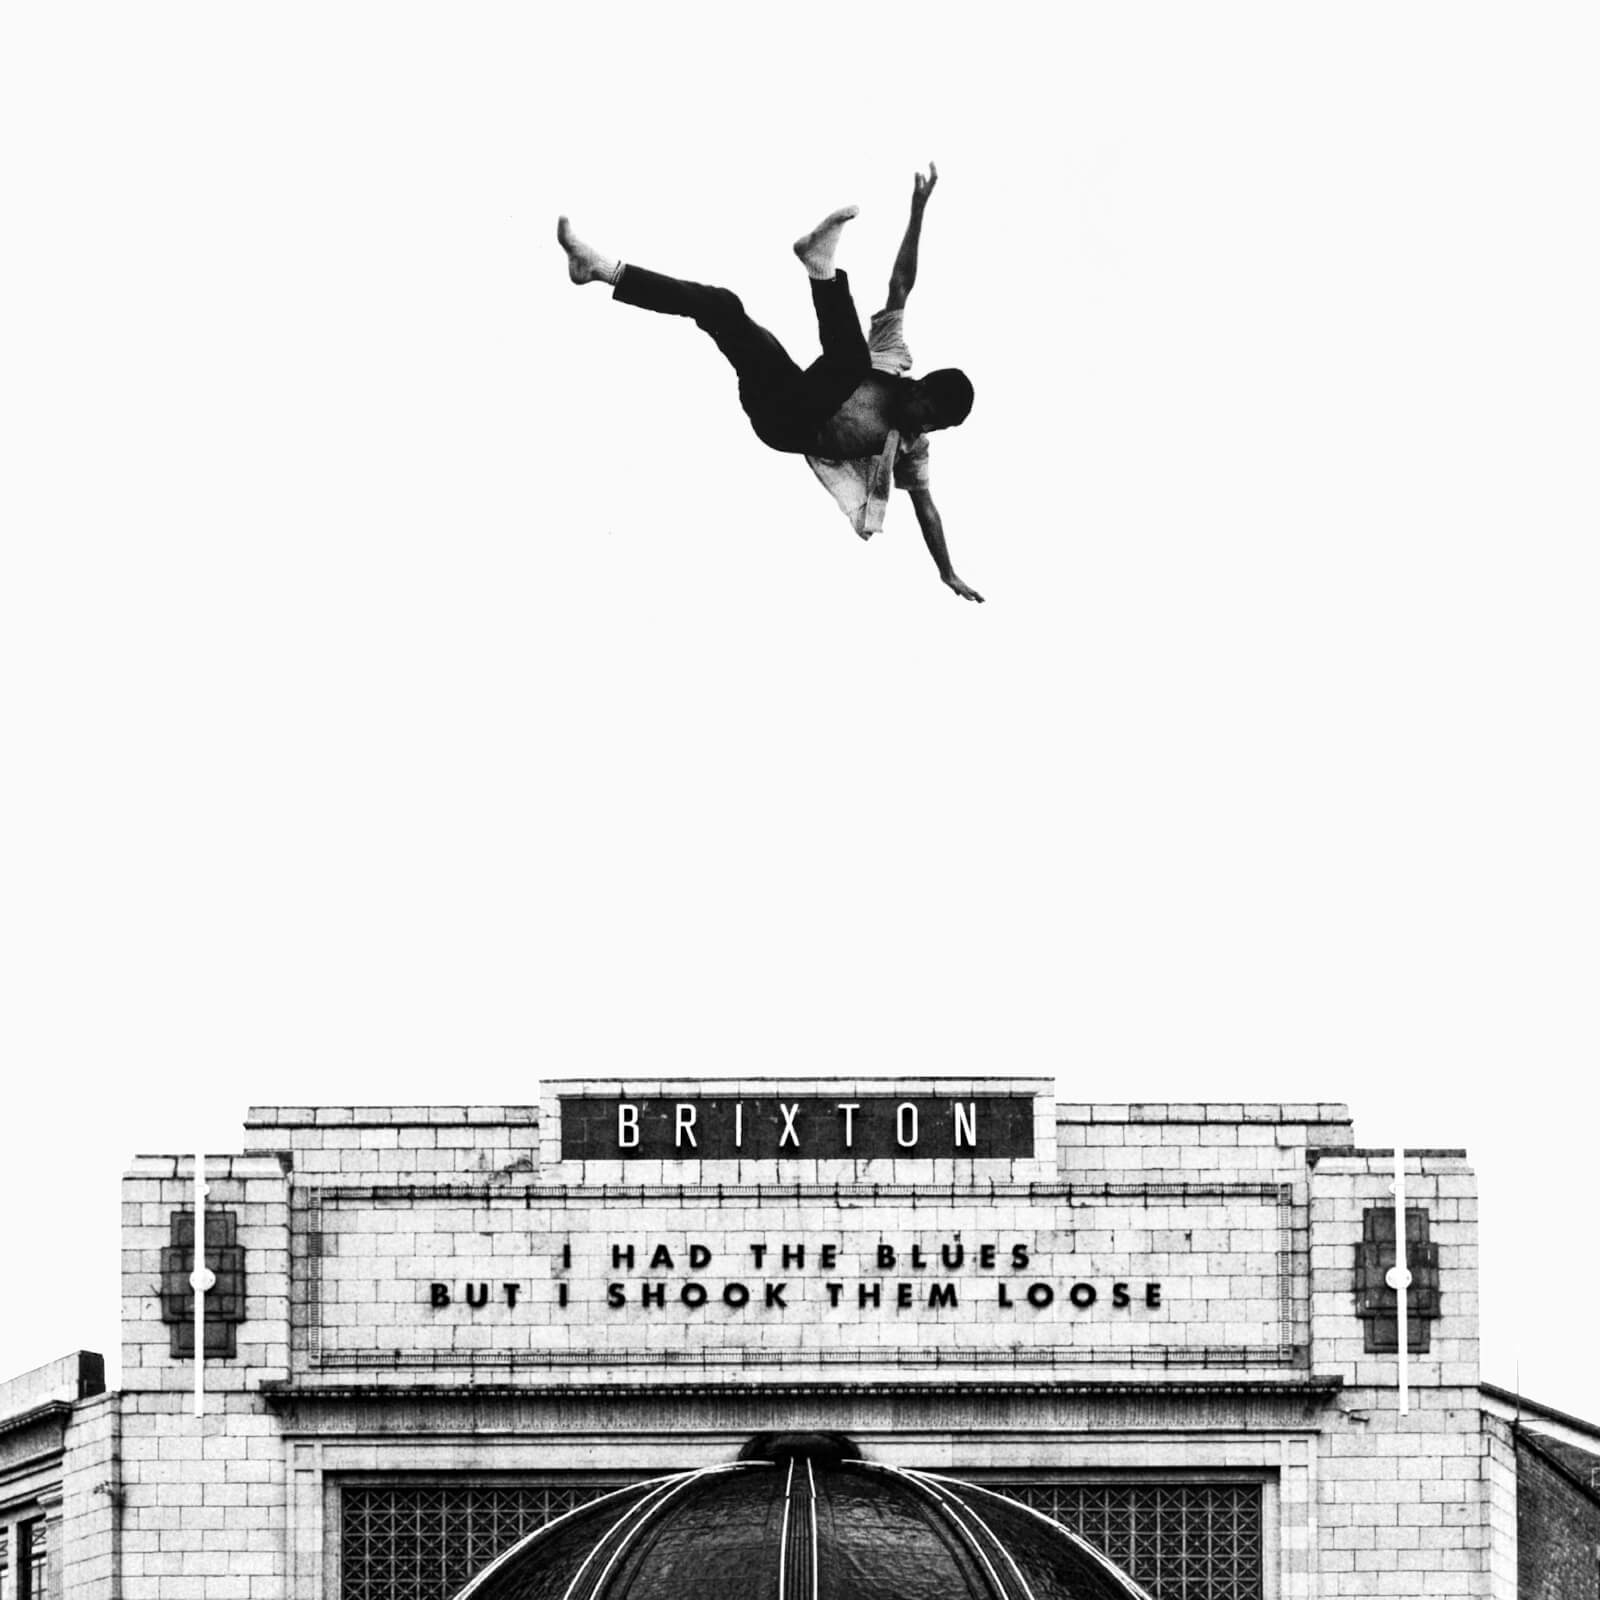 Bombay Bicycle Club - I Had The Blues But I Shook Them Loose - Live At Brixton LP